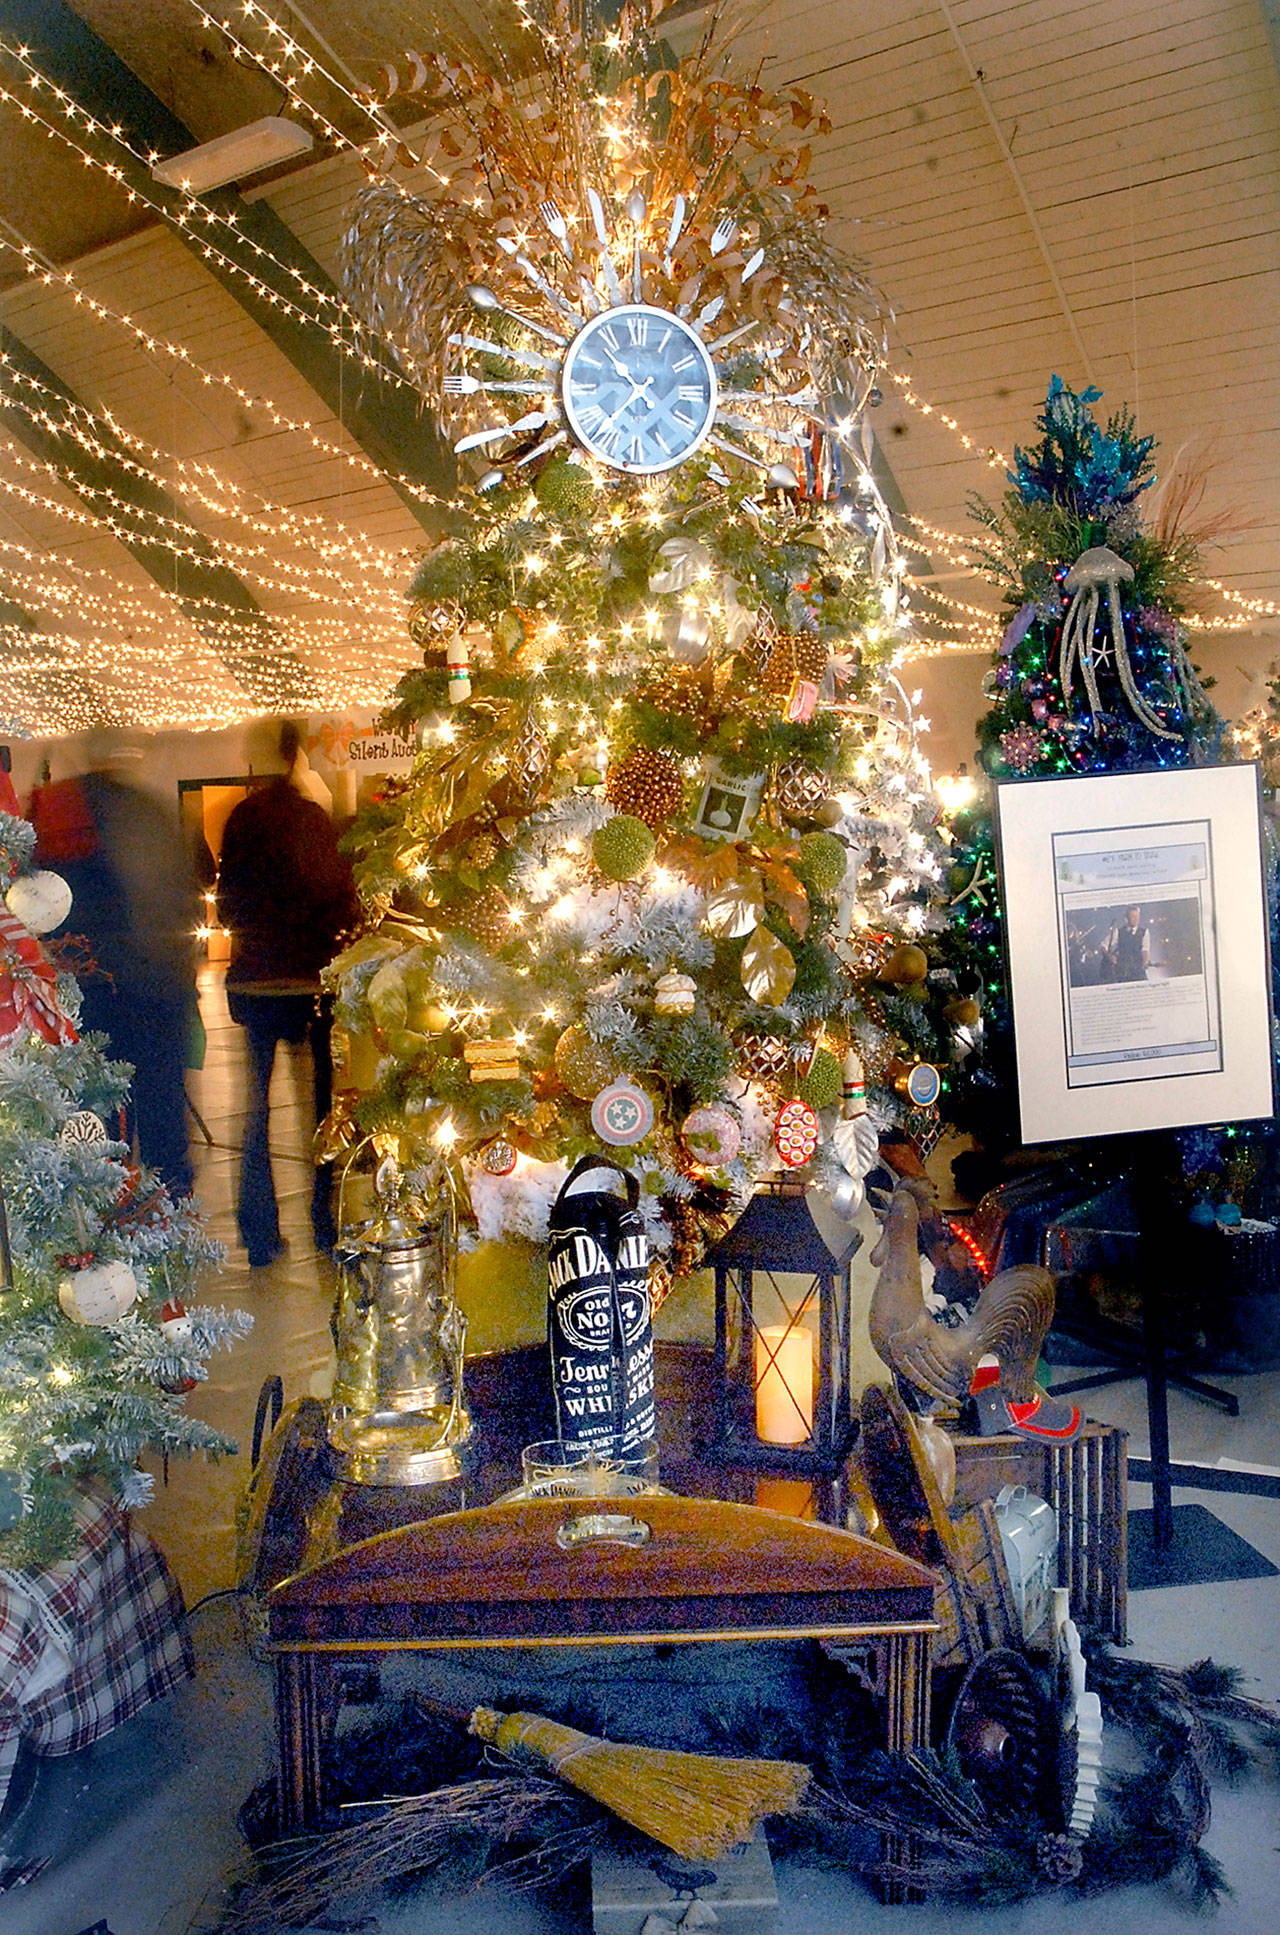 A Christmas tree titled “Farm to Table” stands on display at the 27th annual Festival of Trees at Vern Burton Community Center in Port Angeles. The tree, designed by Kathy Skinner and Pat Elmer and sponsored by Merrill & Ring, Inc., was the top auction tree fetching $6,500 for the Olympic Medical Center Foundation. Auction premiums included a trip to Nashville and tickets to the 2018 Country Music Awards. (Keith Thorpe/Peninsula Daily News)